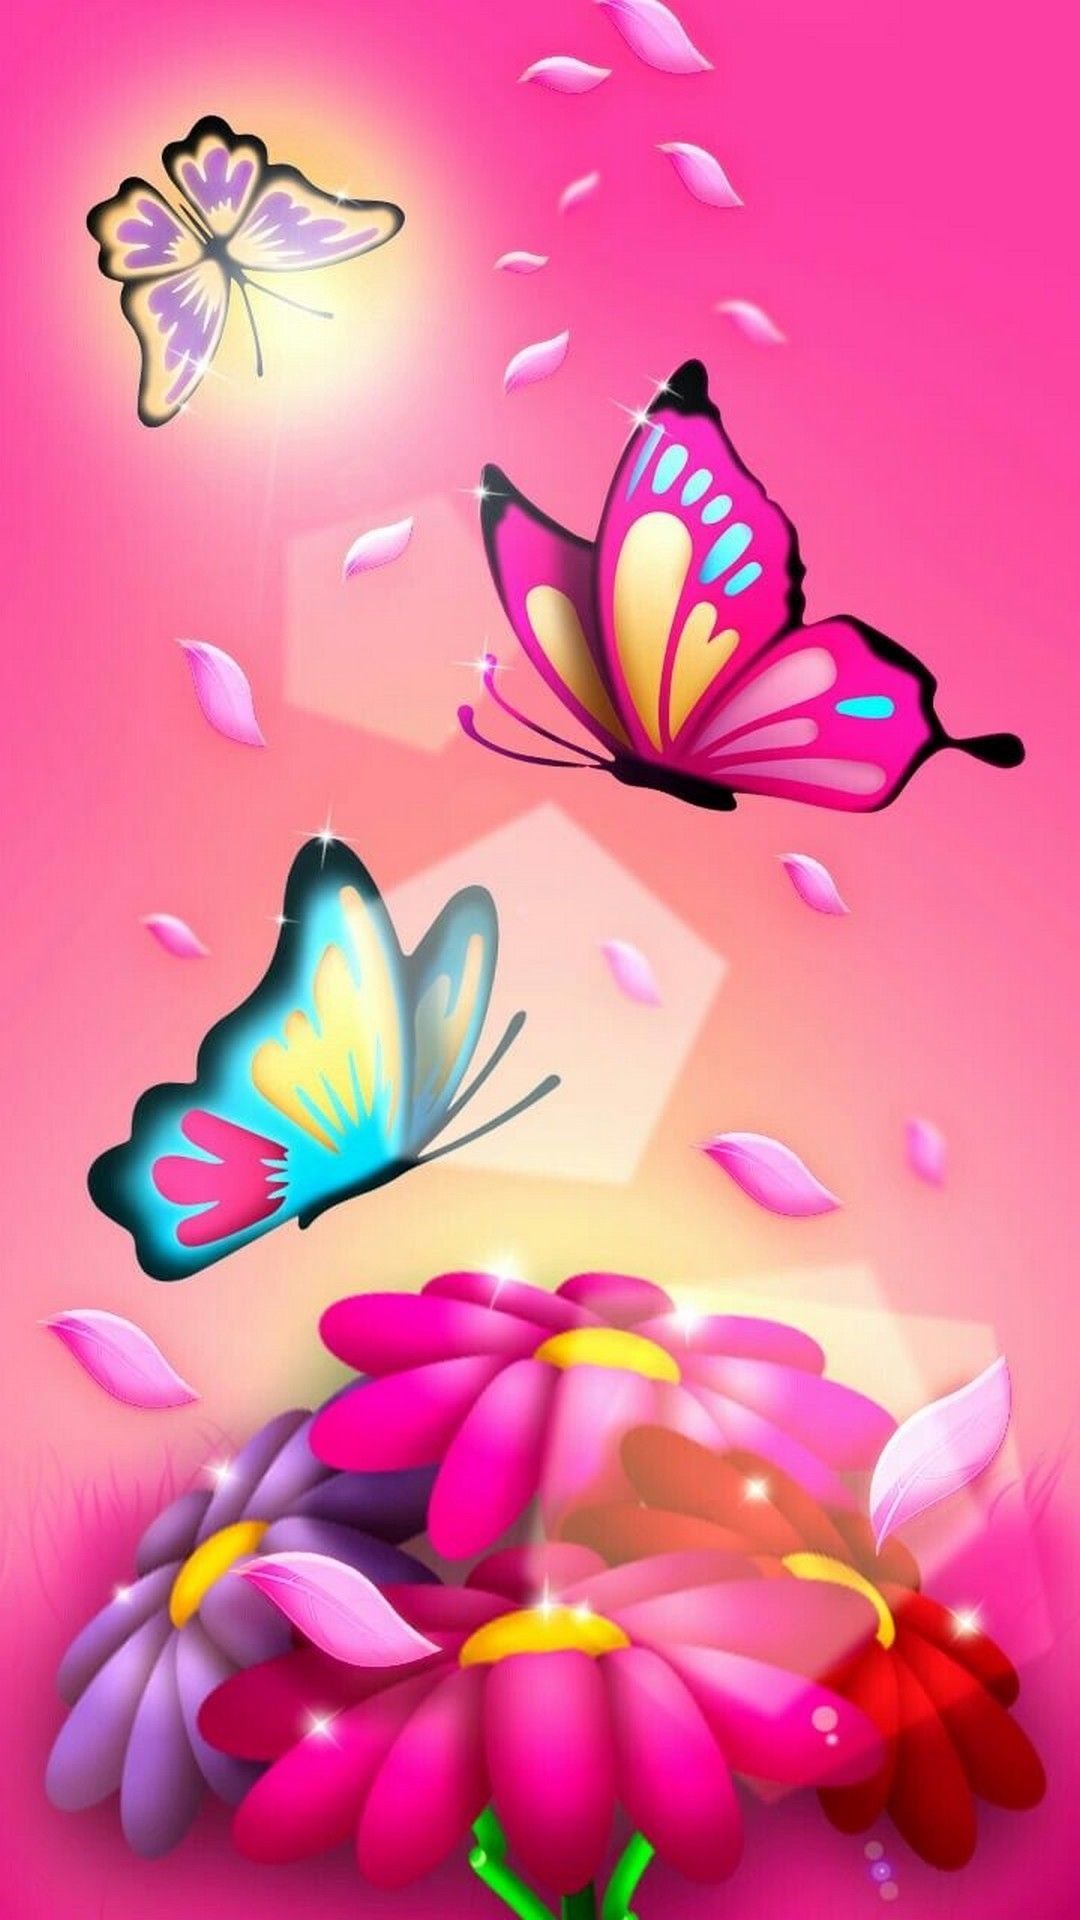 Wallpaper Android Pink Butterfly Mobile Wallpaper. Quick